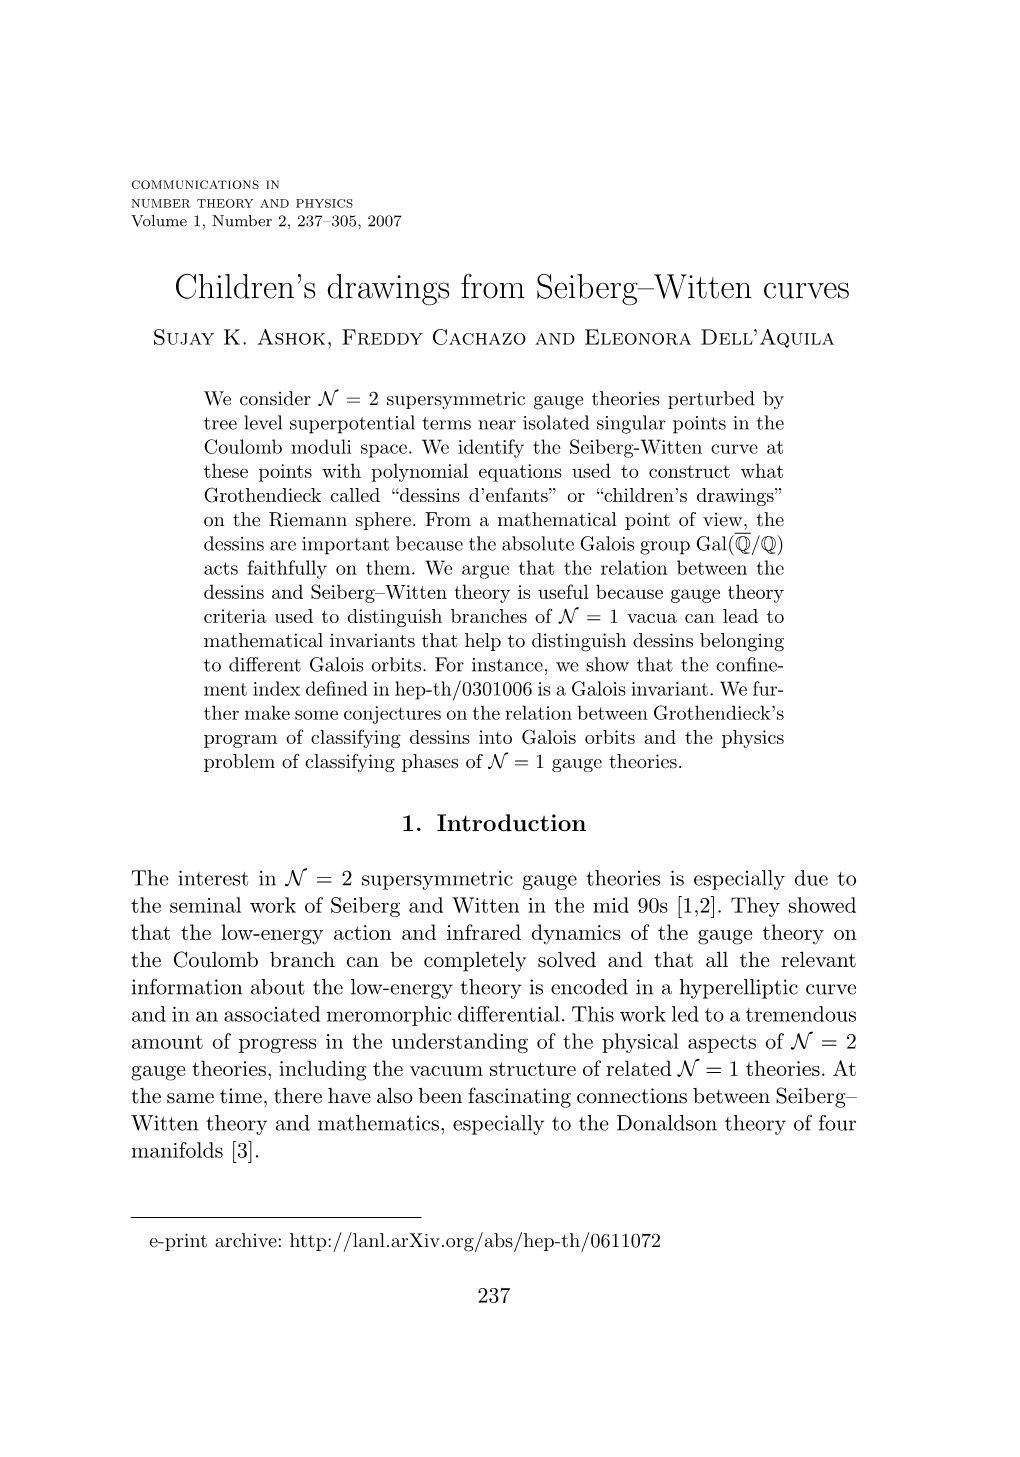 Children's Drawings from Seiberg–Witten Curves